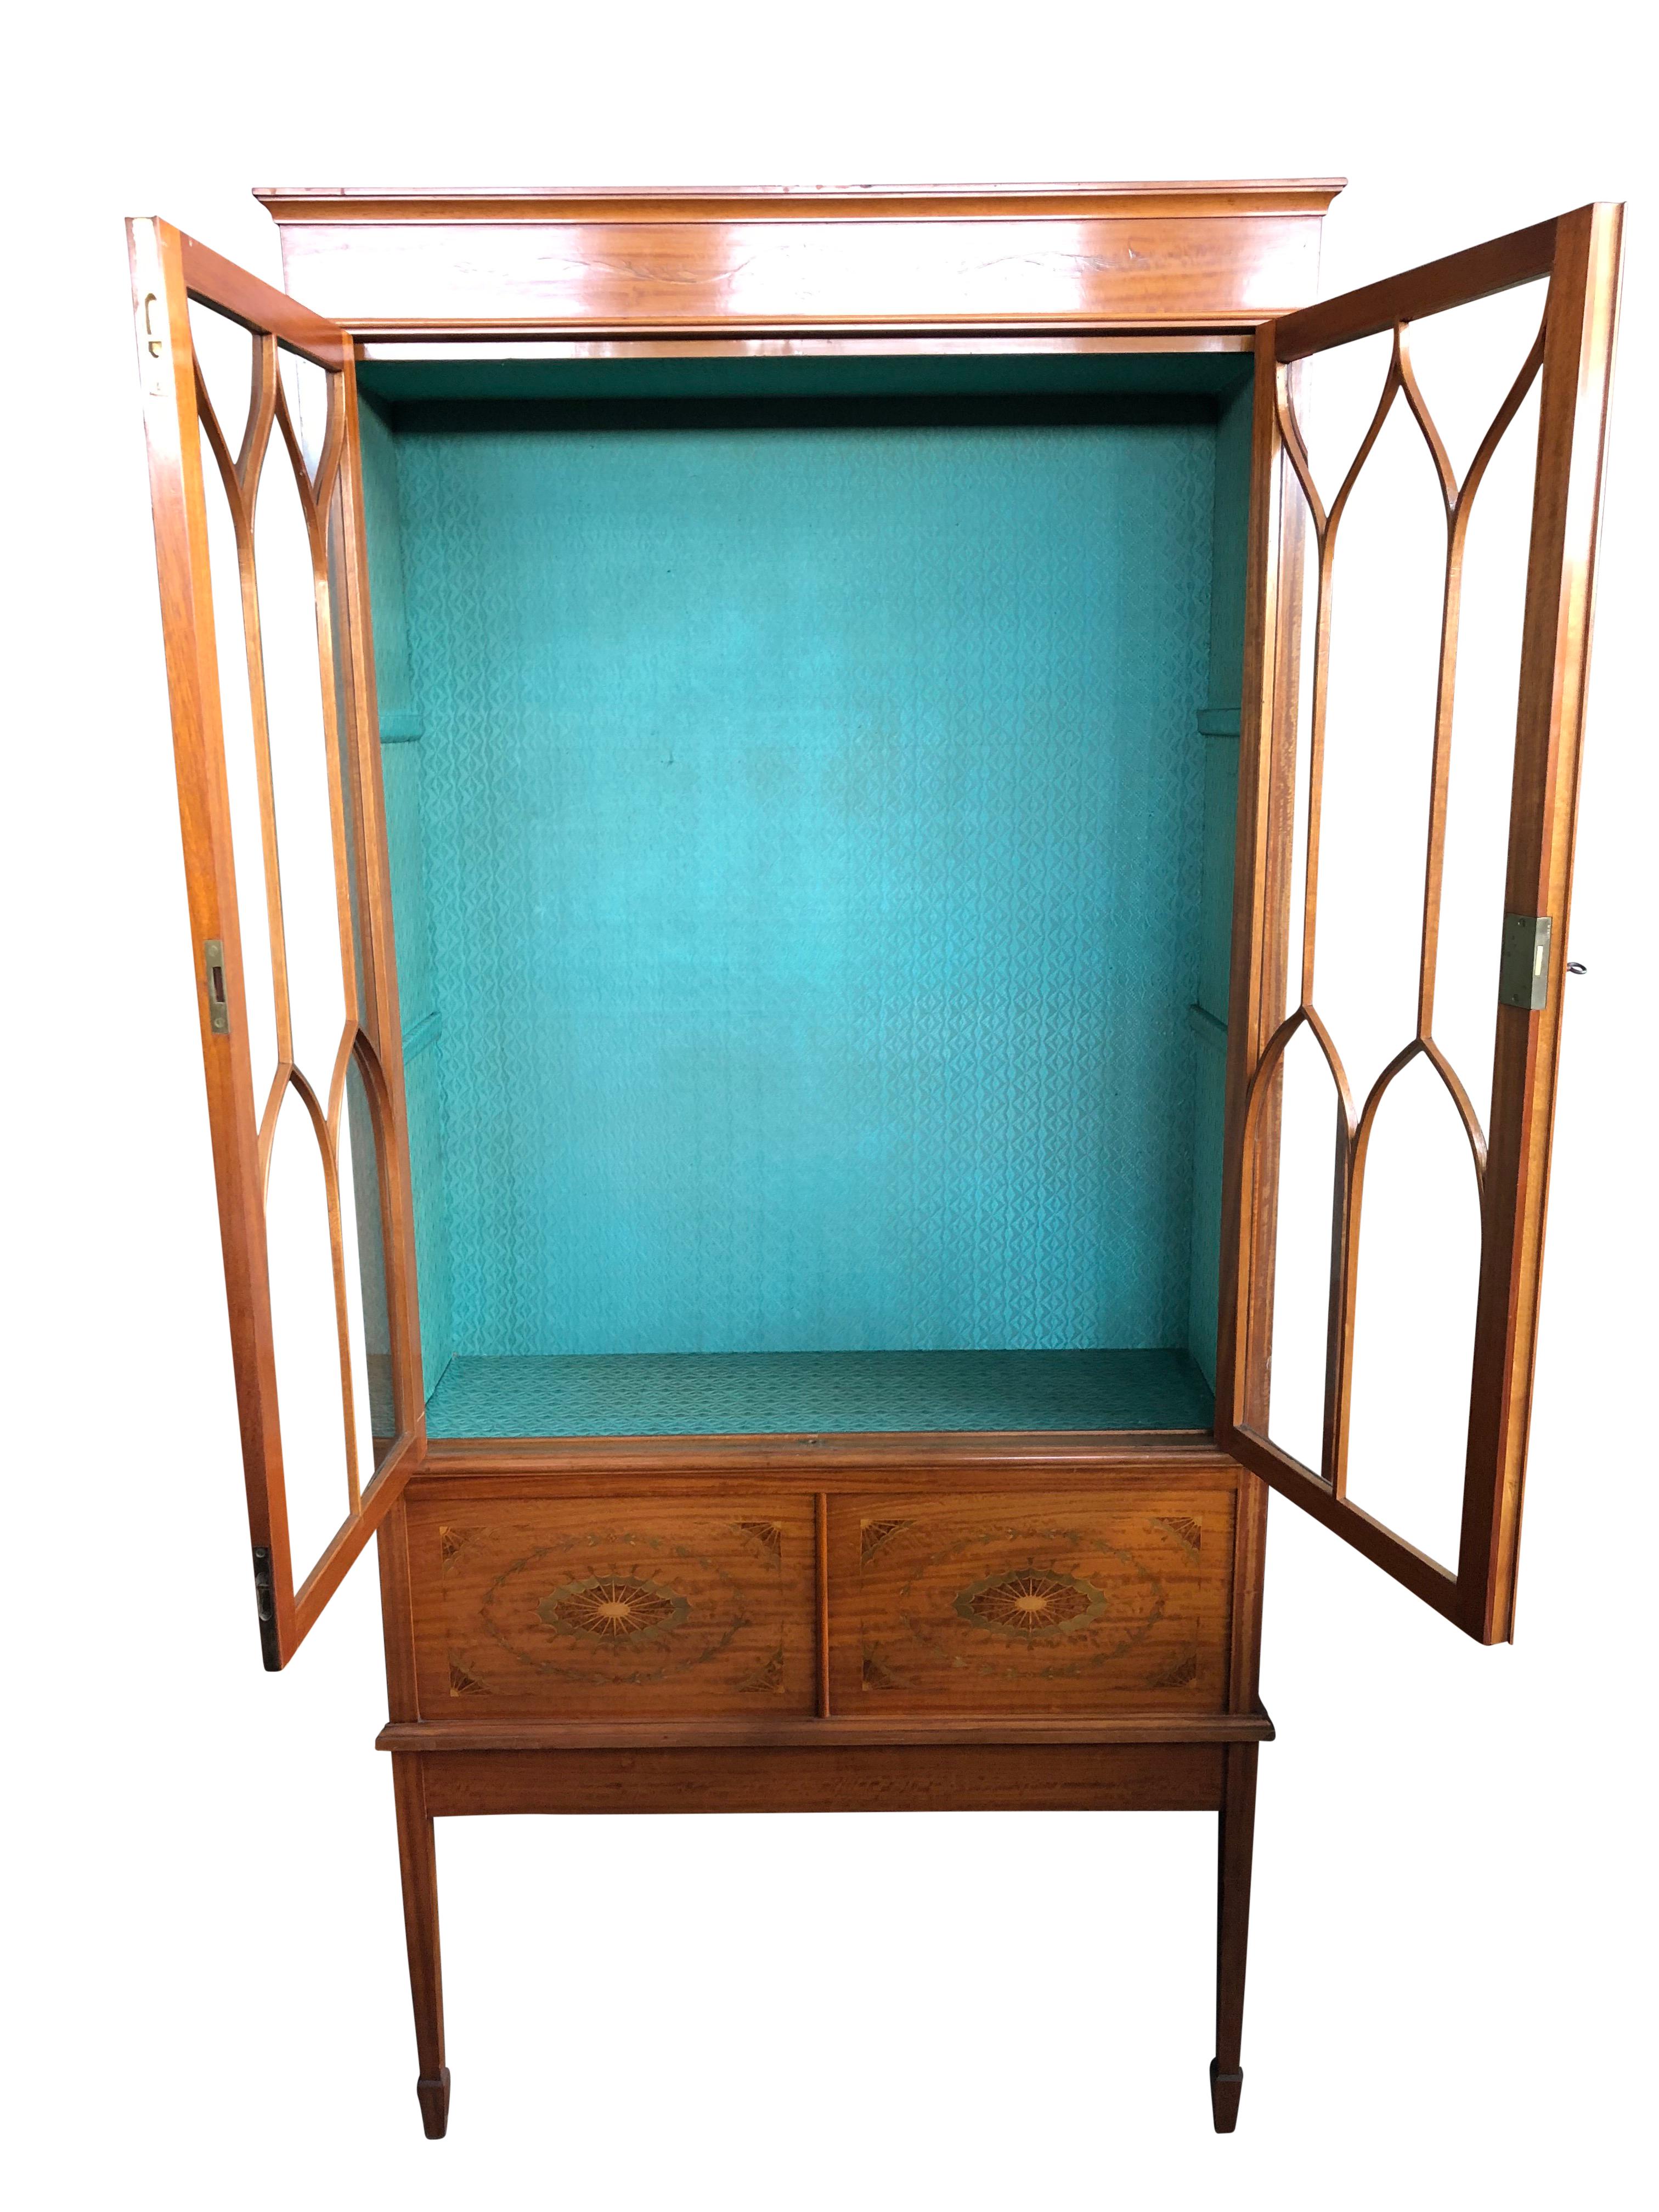 A superb French Regency style Sheraton lit and glass cabinet with a beautiful pine green rear. The cabinet features two drawers with stunning marquetry inlay.